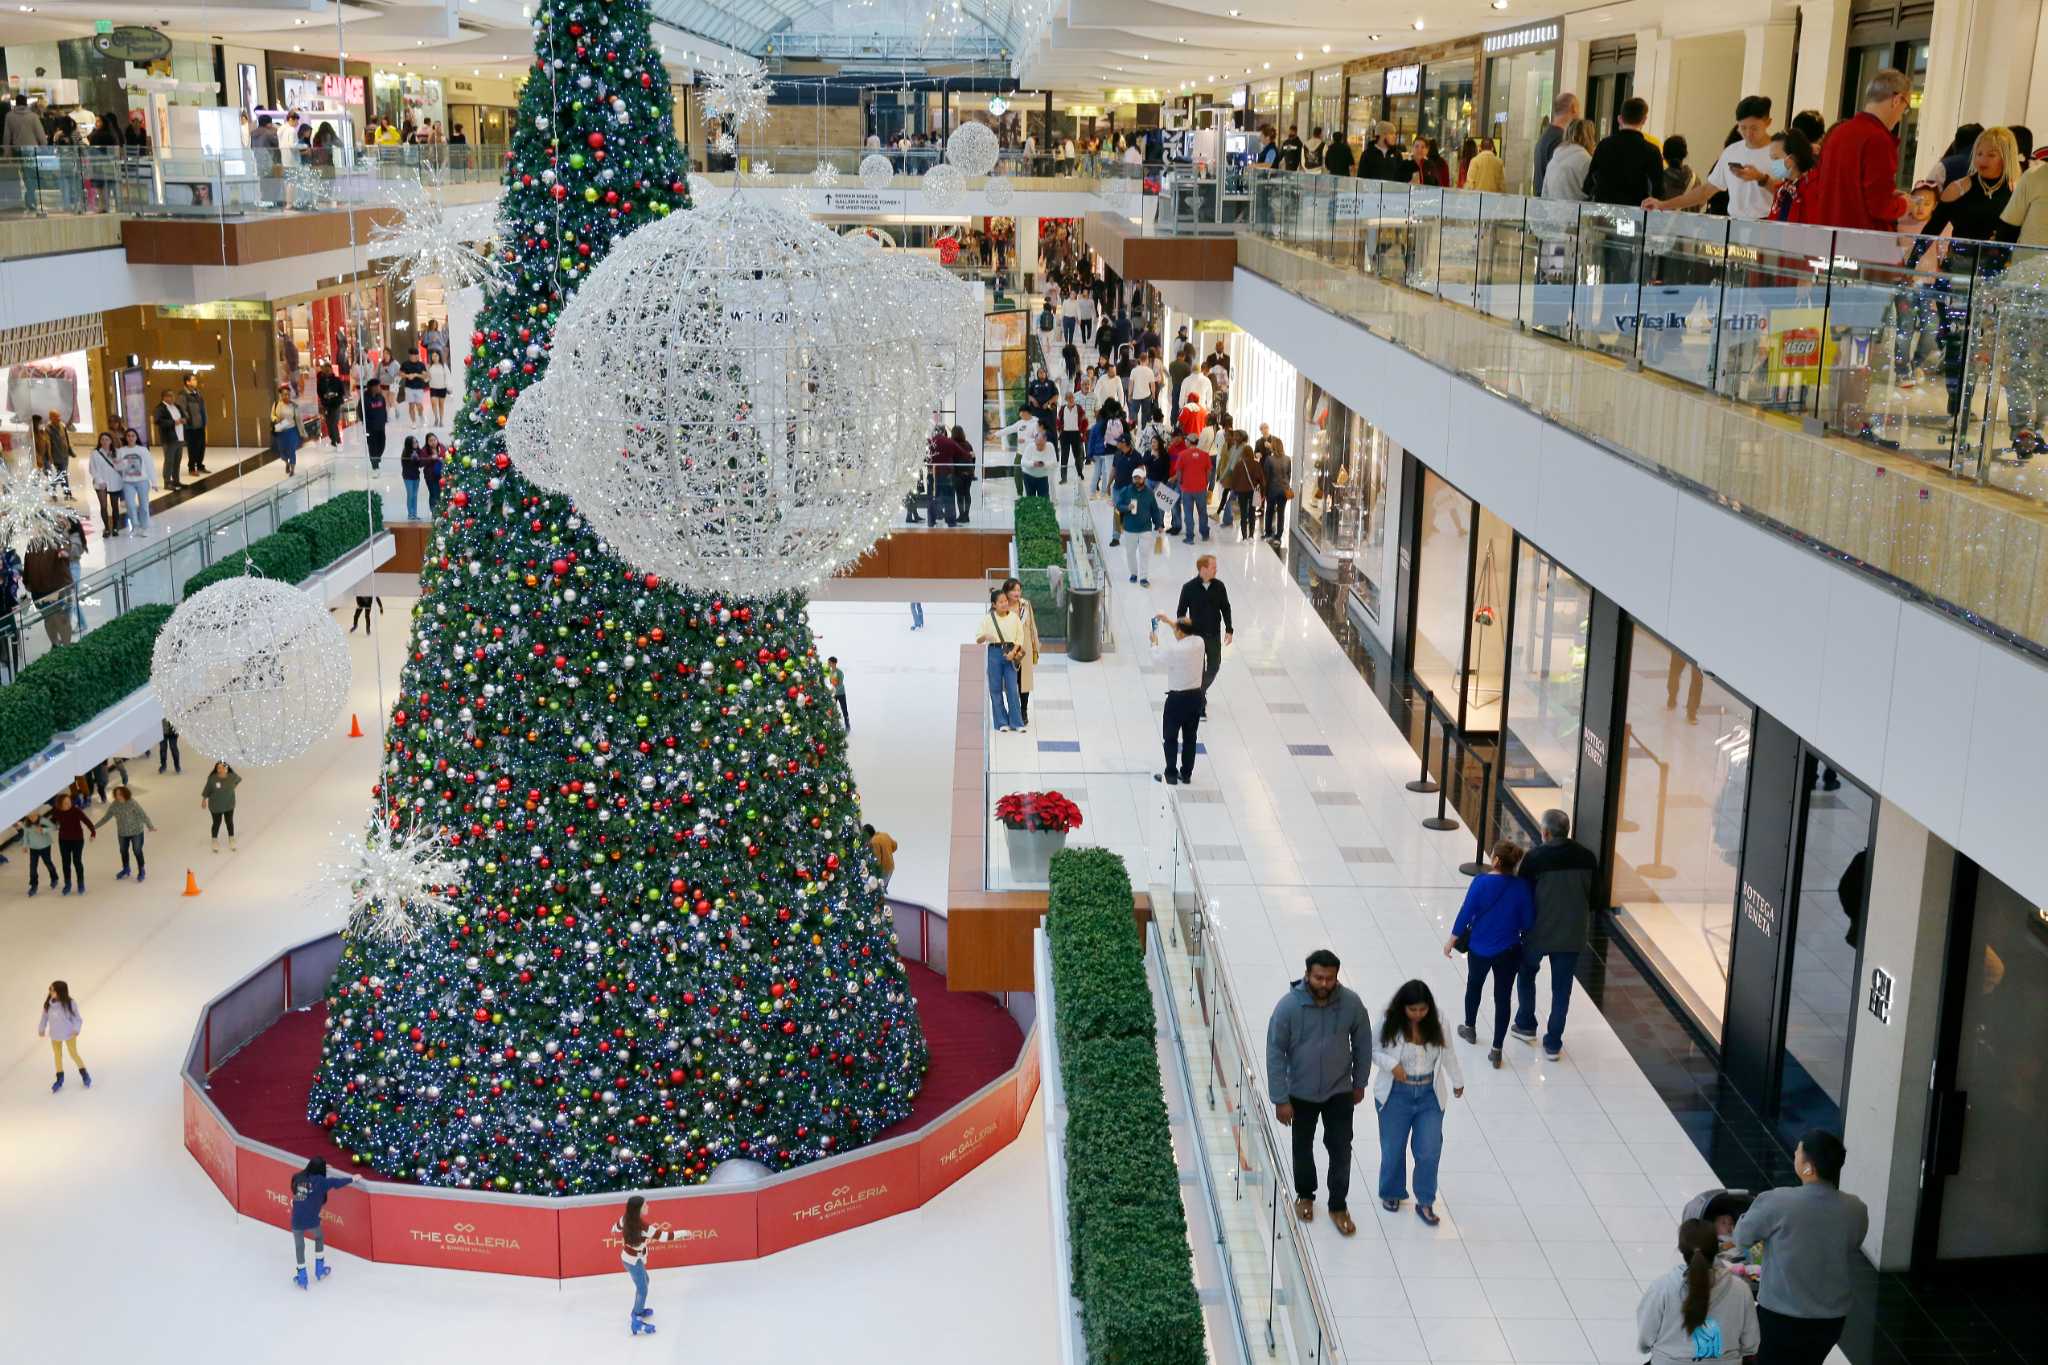 Let's Go Shopping it's Christmas Time//The Galleria Mall Houston